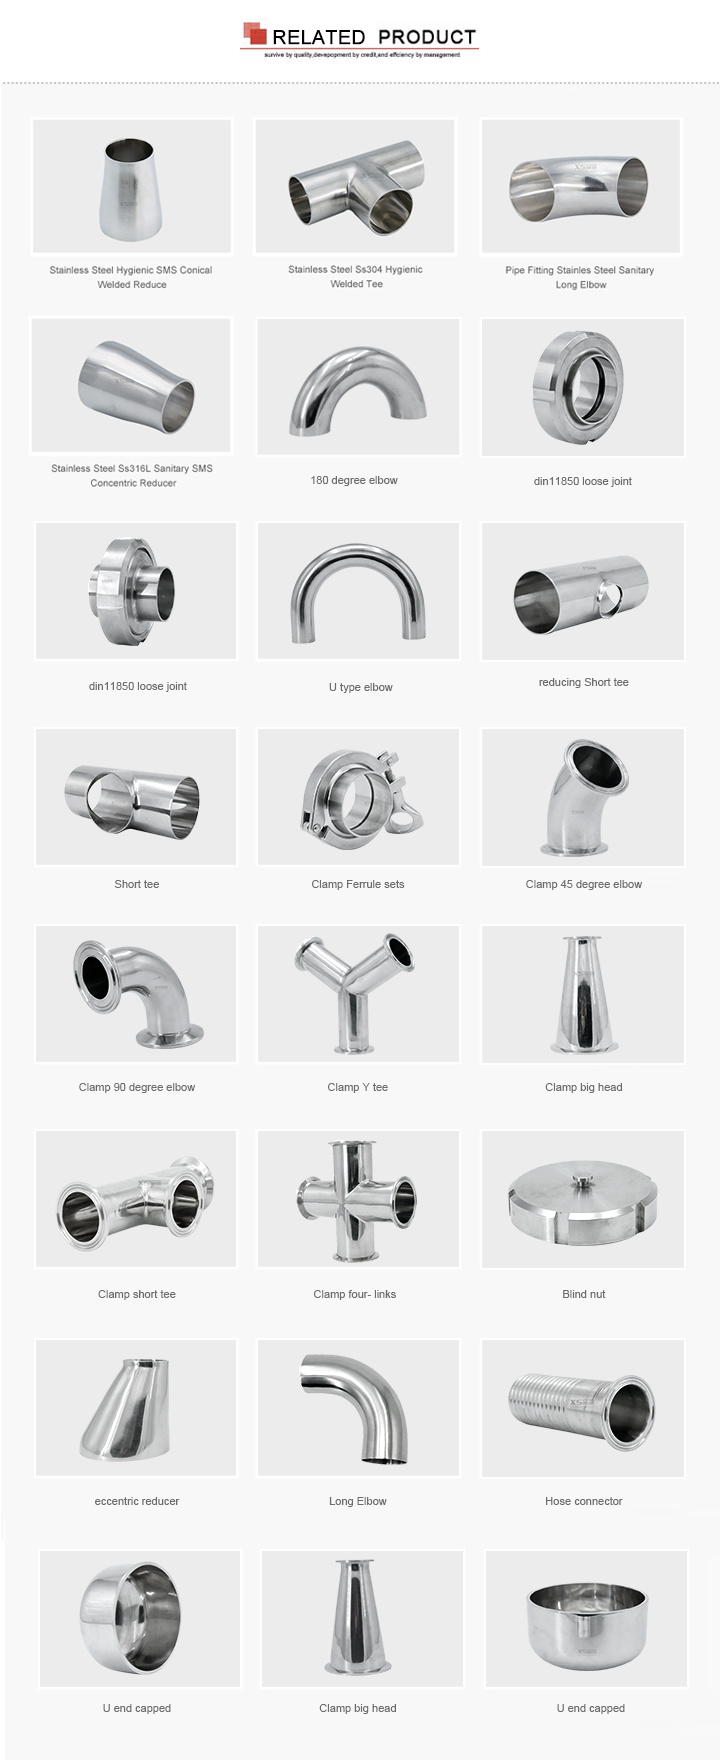 China Sanitary Pipe Fittings Threading Blind Nut